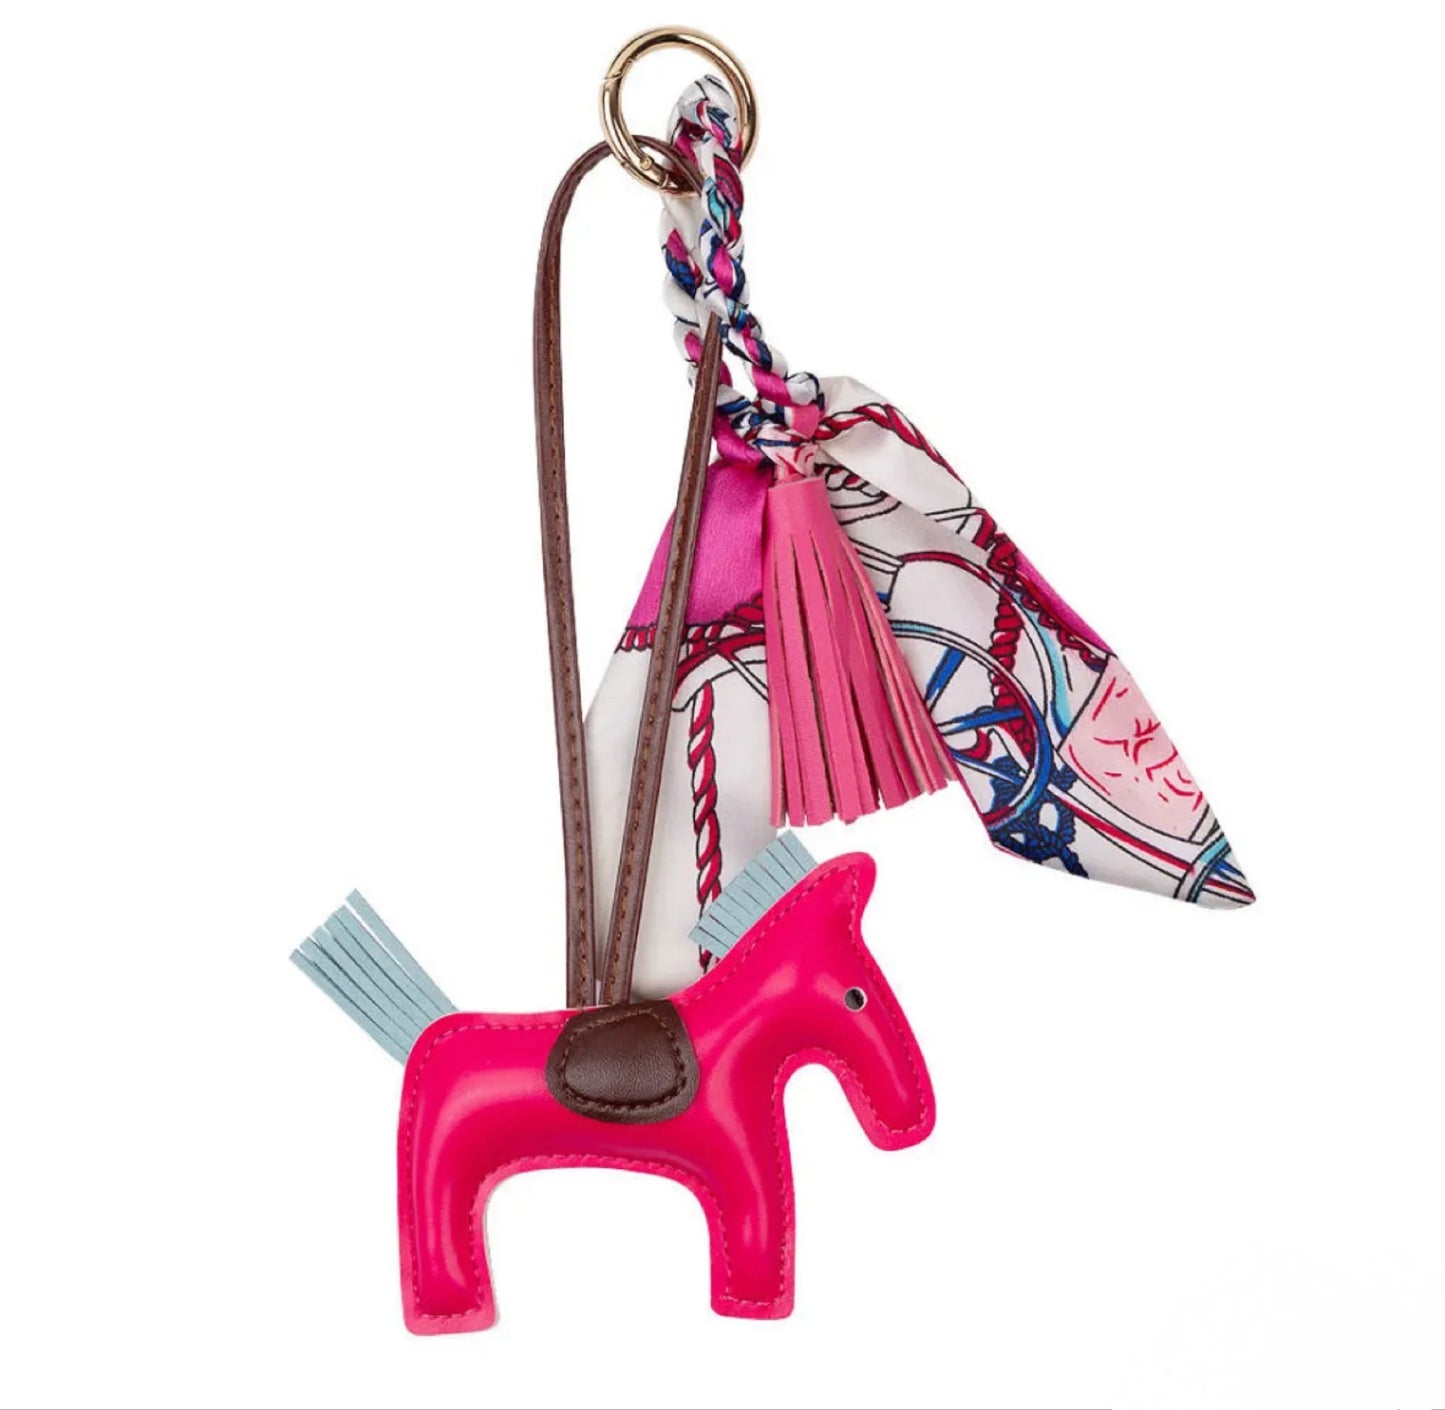 Deluxe Equestrian Key Ring - Hot Pink